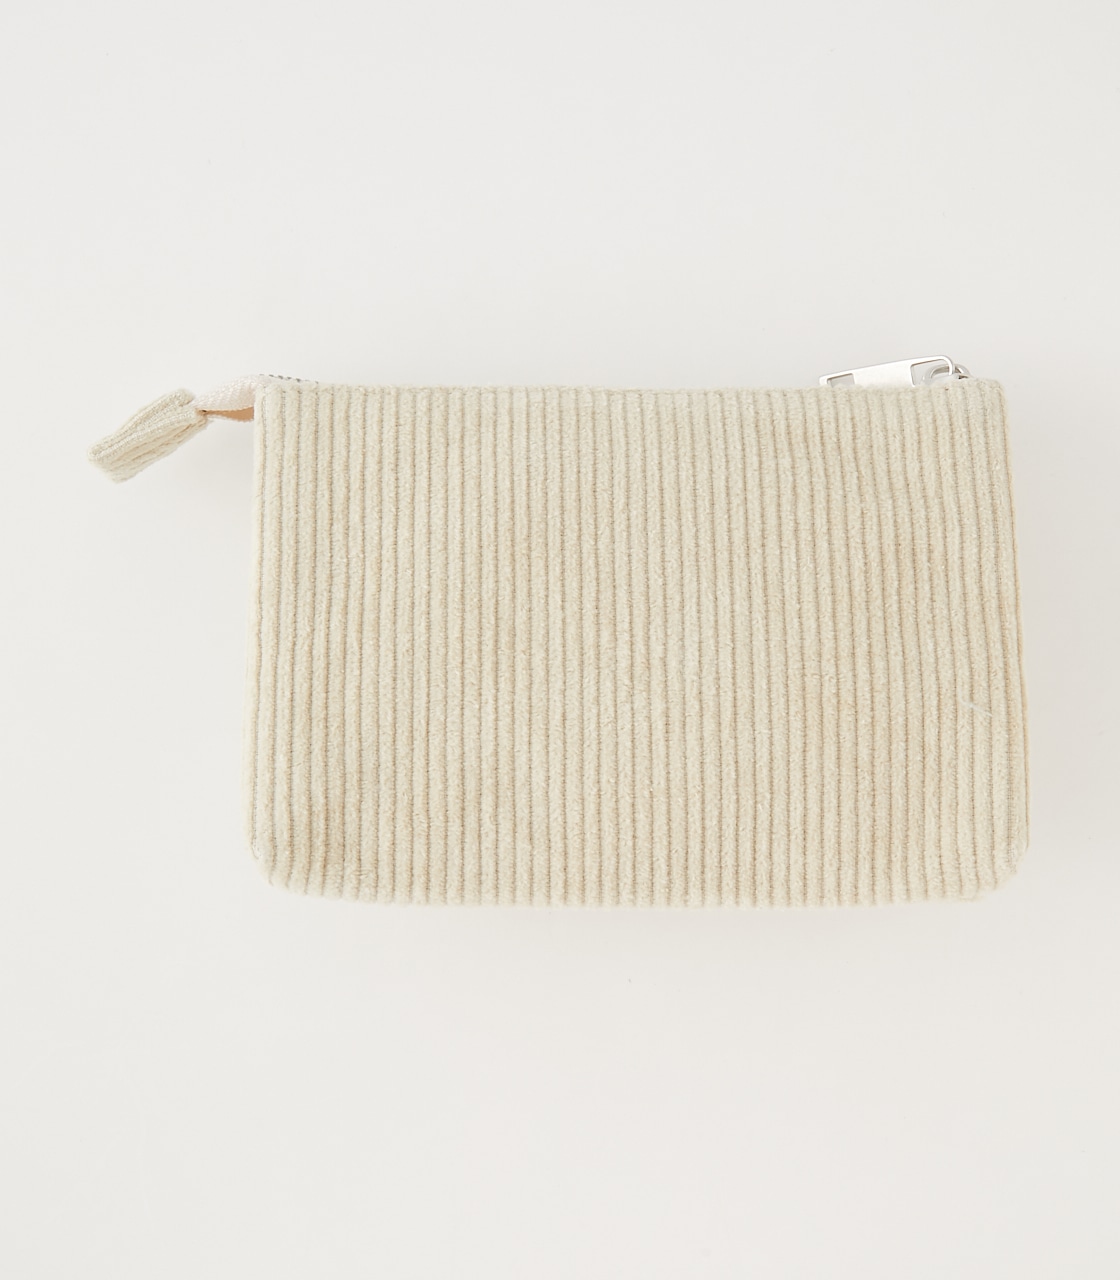 CONCHO CORDUROY POUCH/コンチョコーデュロイポーチ